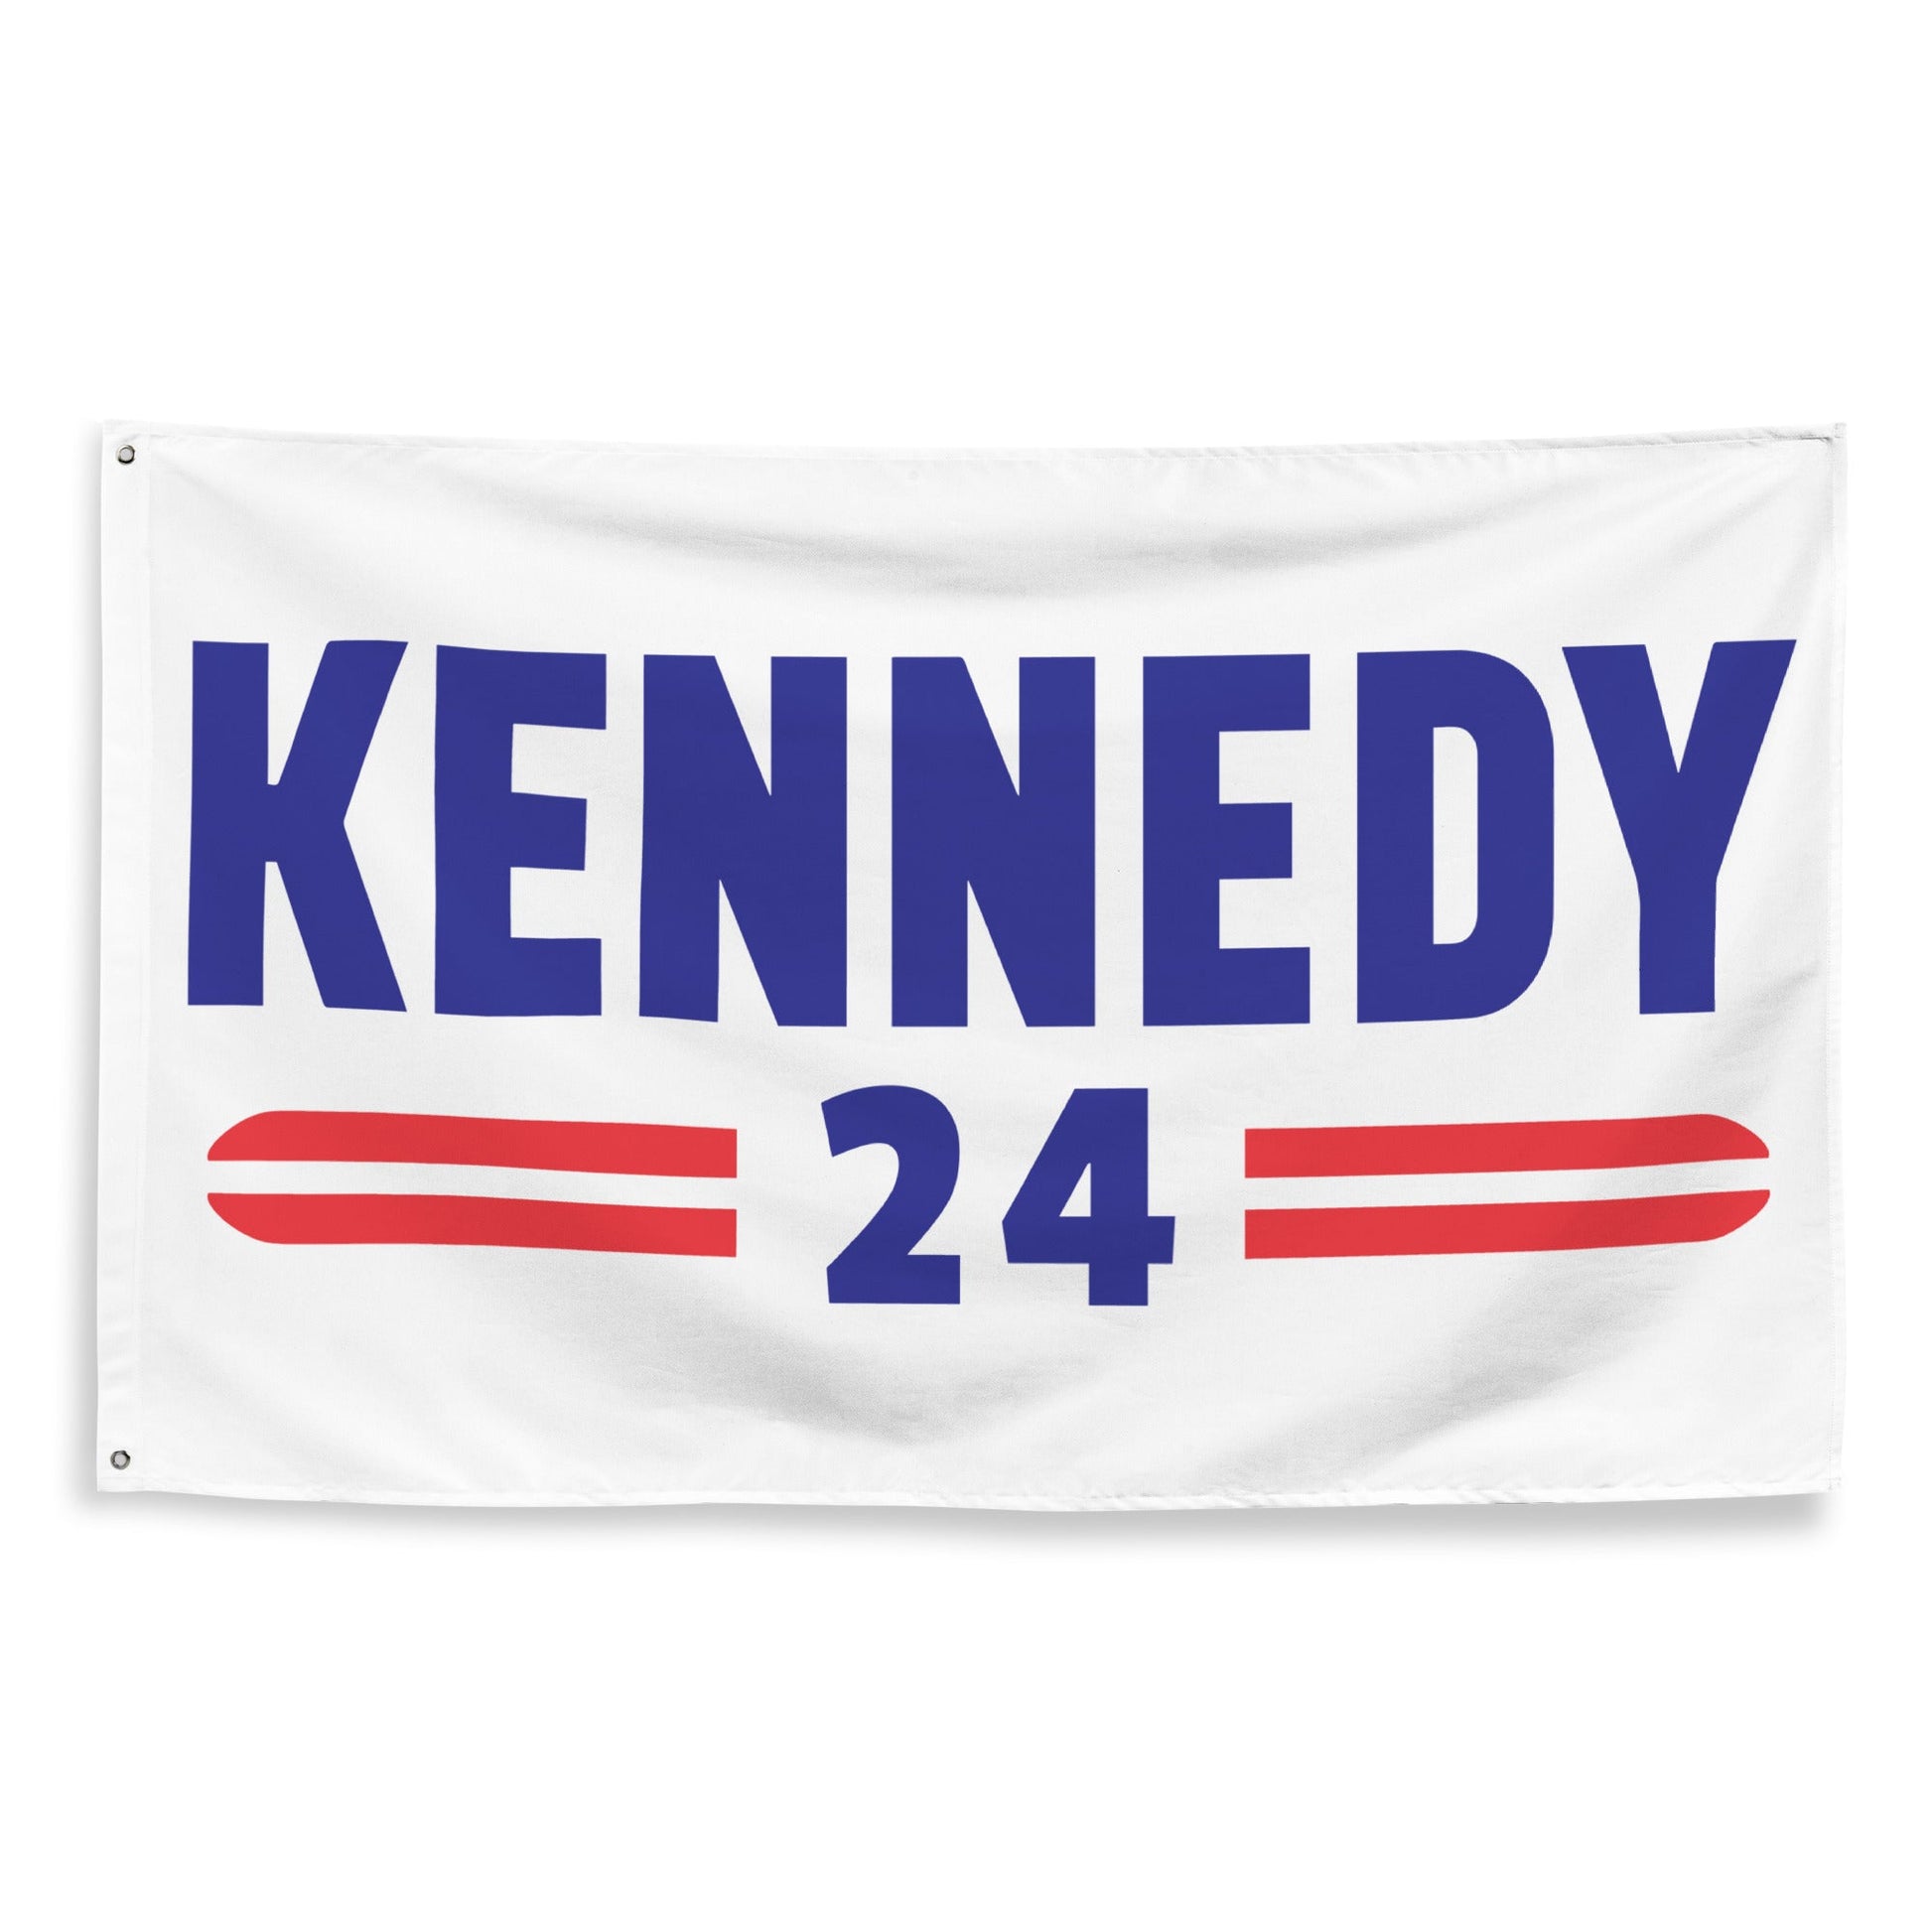 Kennedy Classic Flag - TEAM KENNEDY. All rights reserved